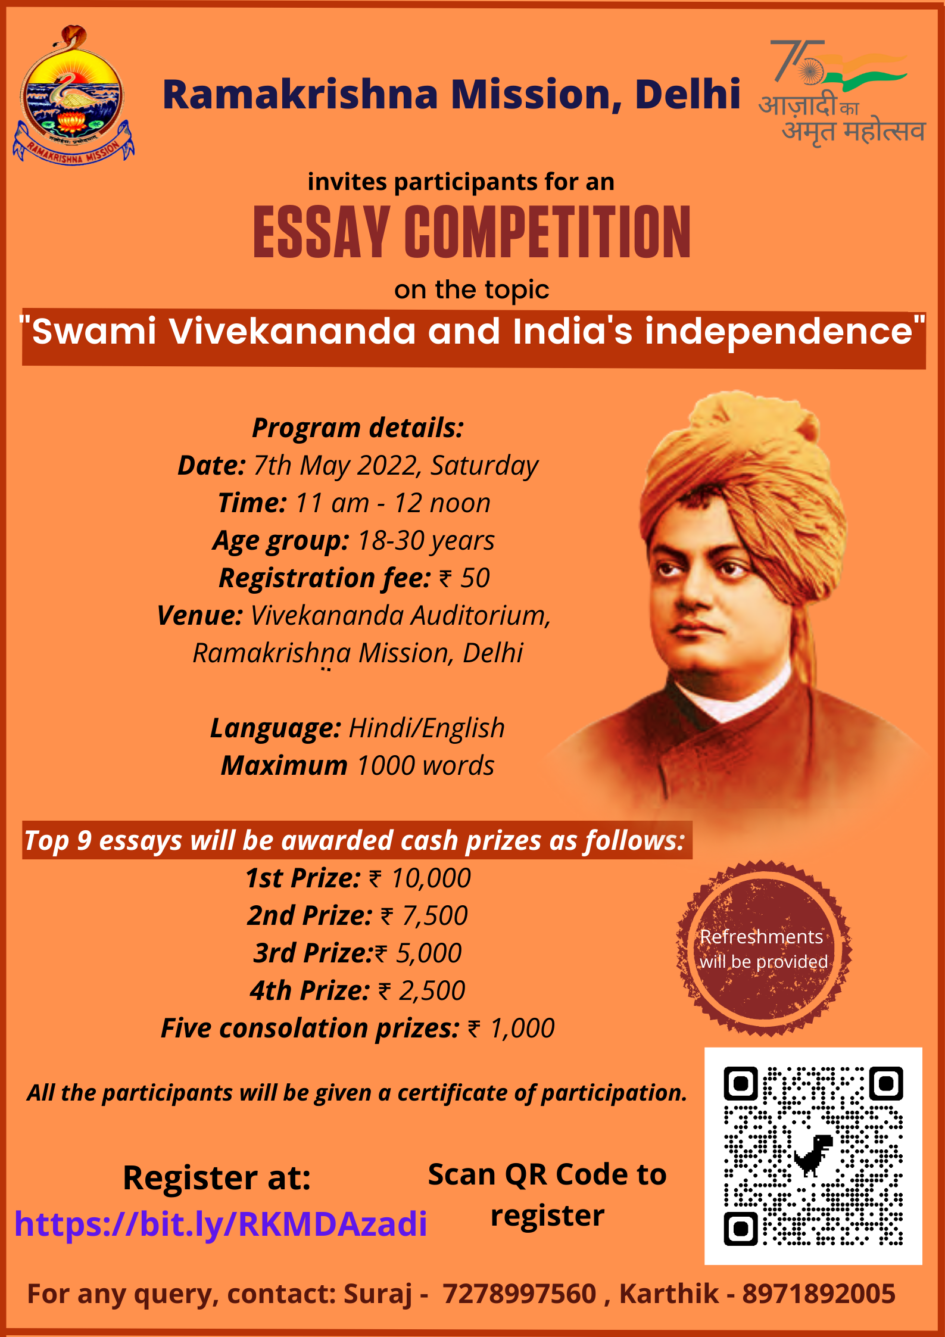 railway minister hindi essay competition 2022